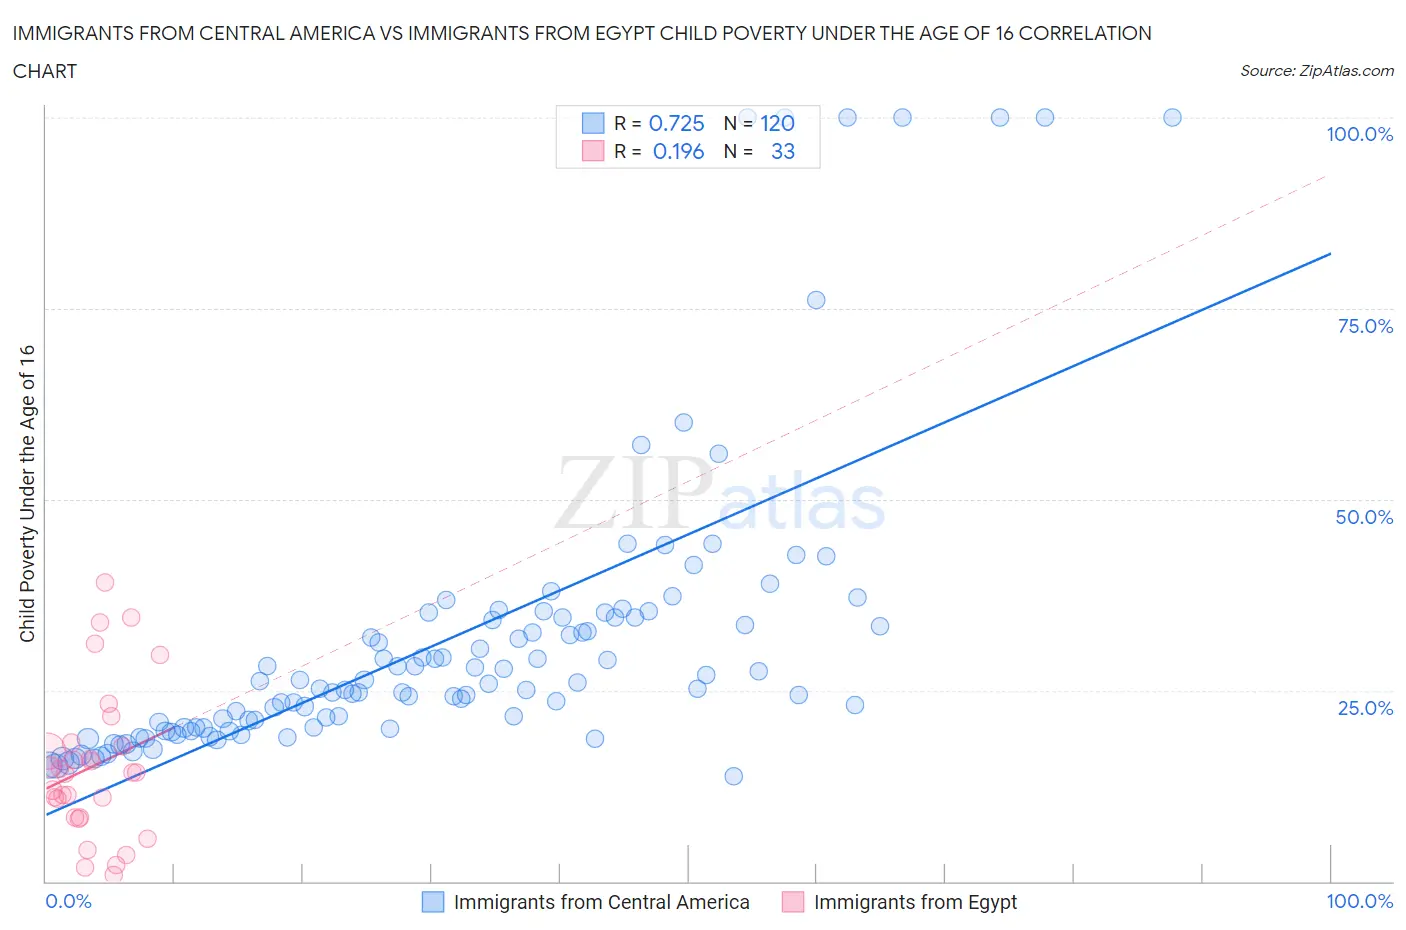 Immigrants from Central America vs Immigrants from Egypt Child Poverty Under the Age of 16